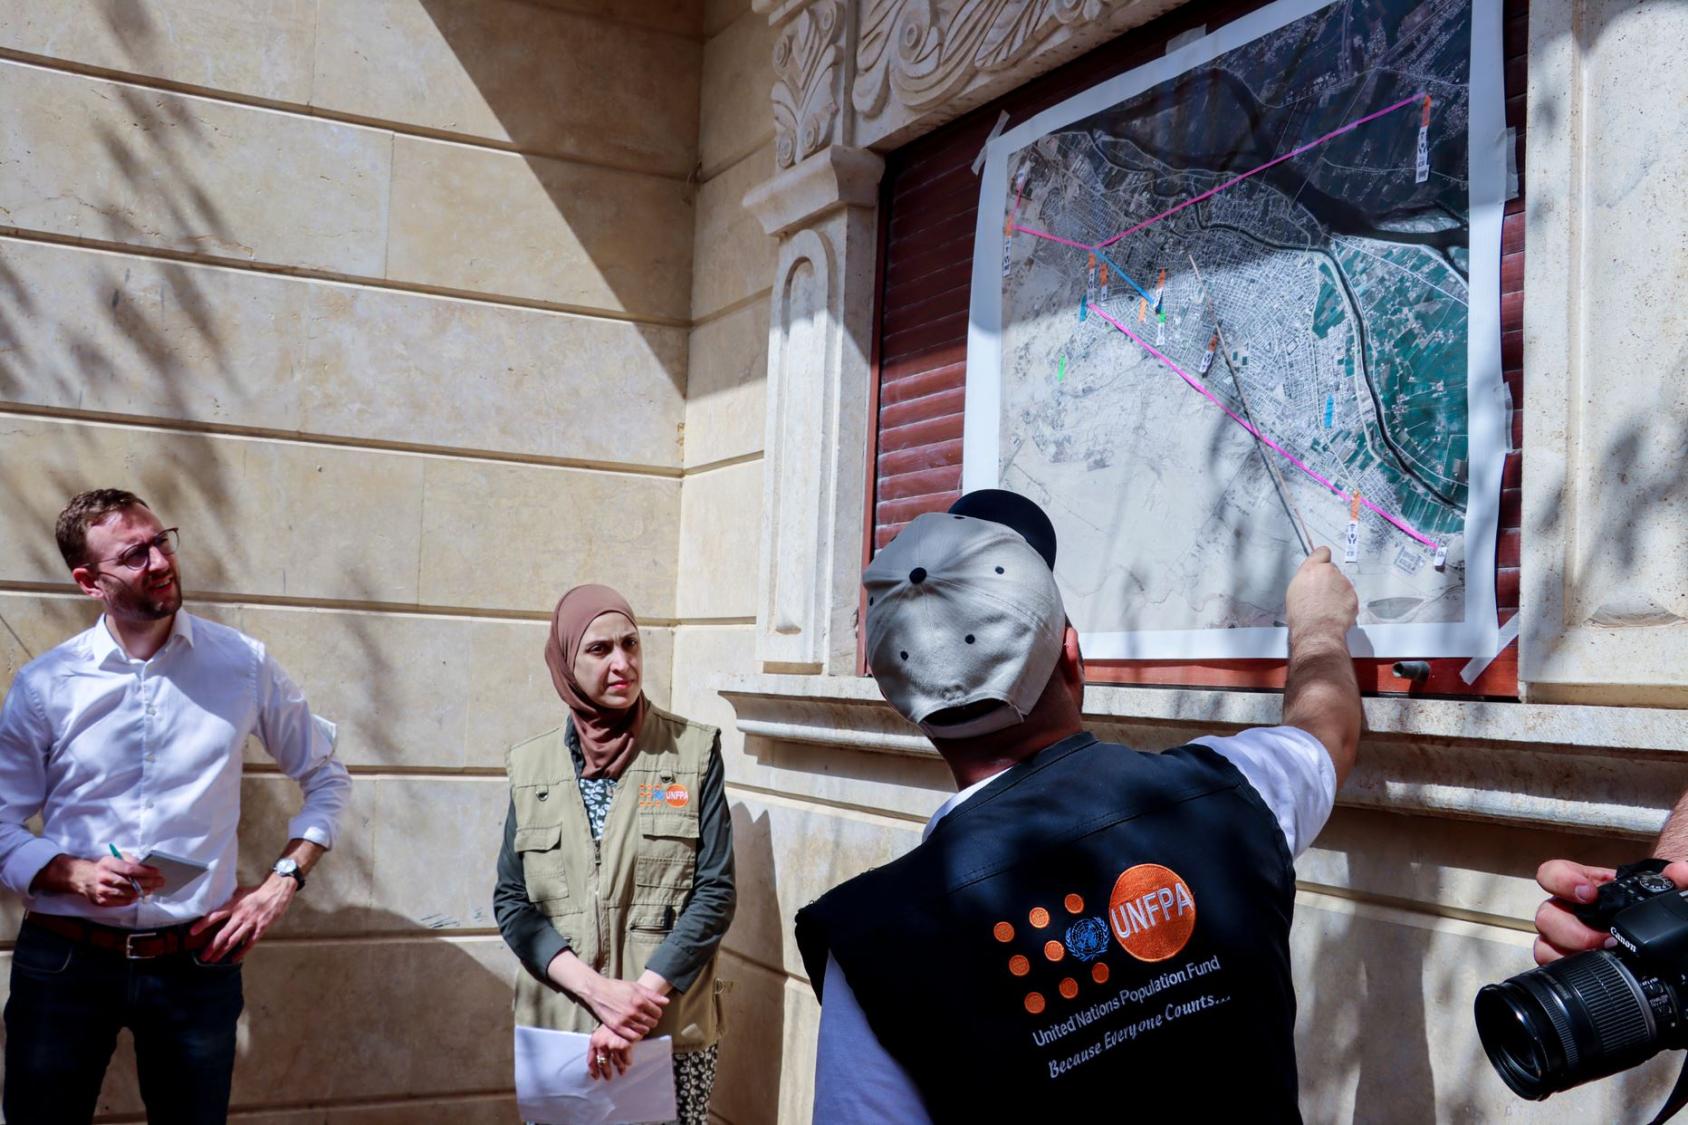 Officers from UNFPA brief a group of donors during a visit to urban Deir Ezzor.   